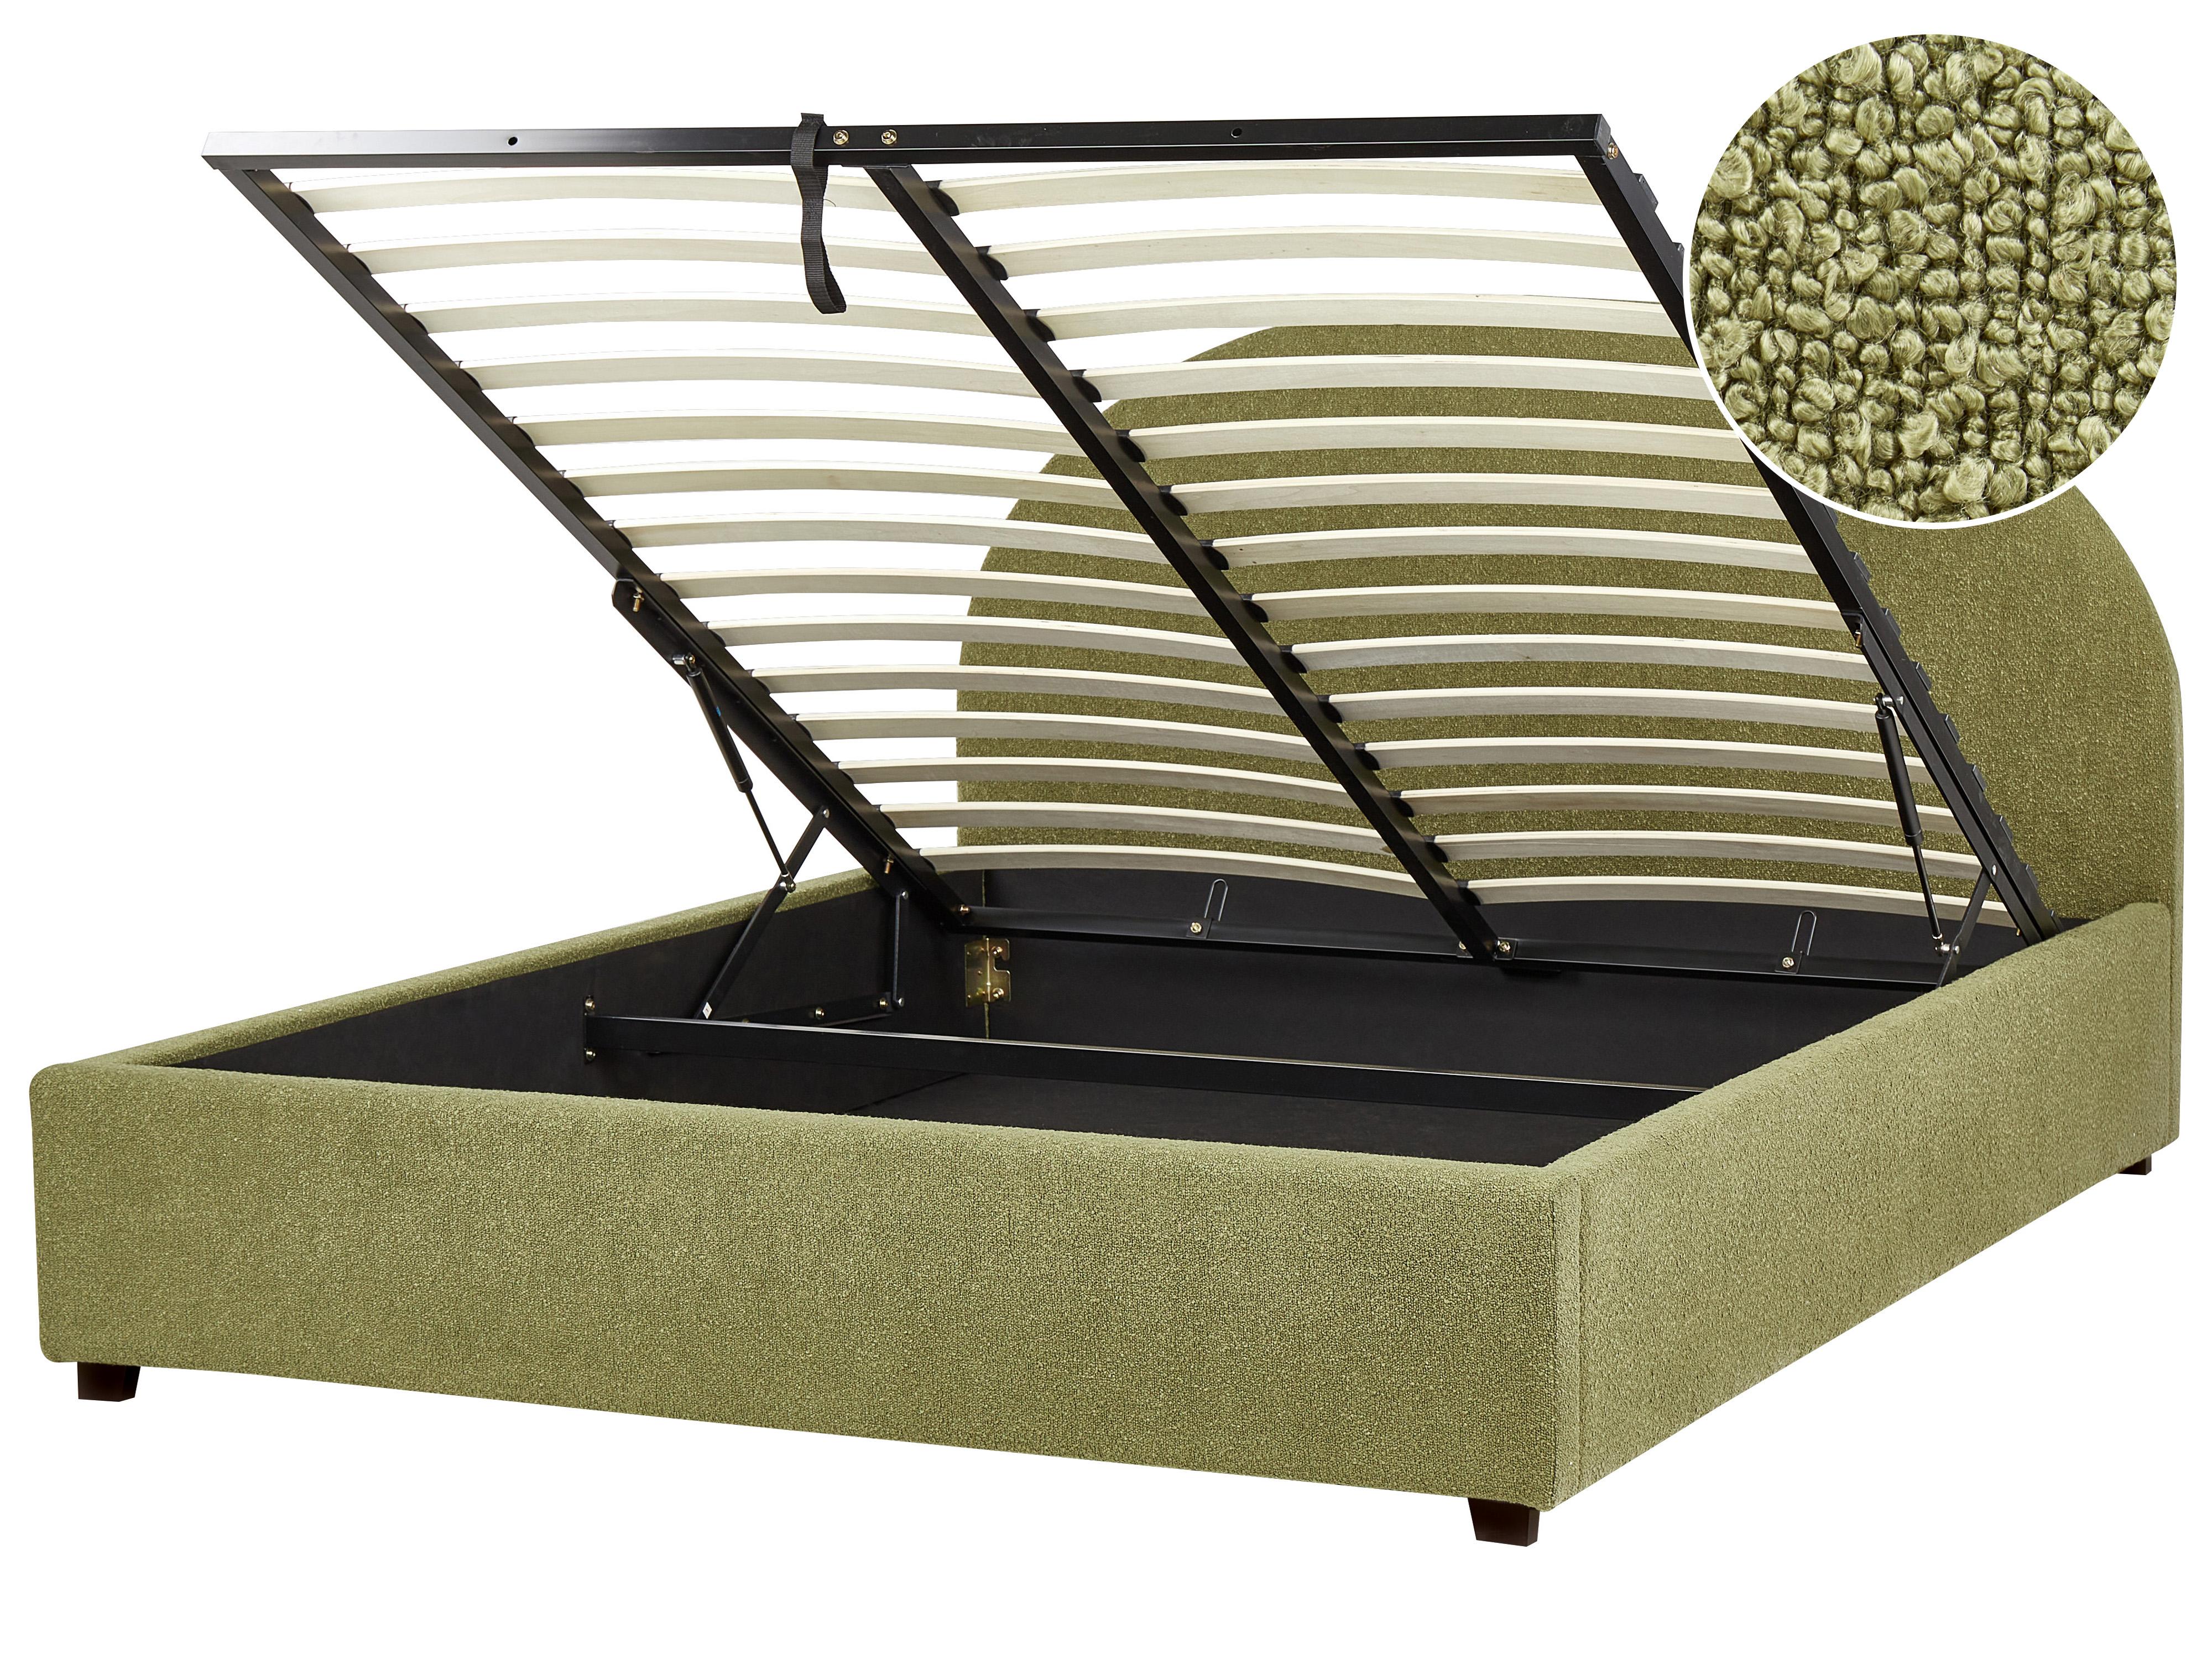 Boucle EU King Size Ottoman Bed Olive Green VAUCLUSE